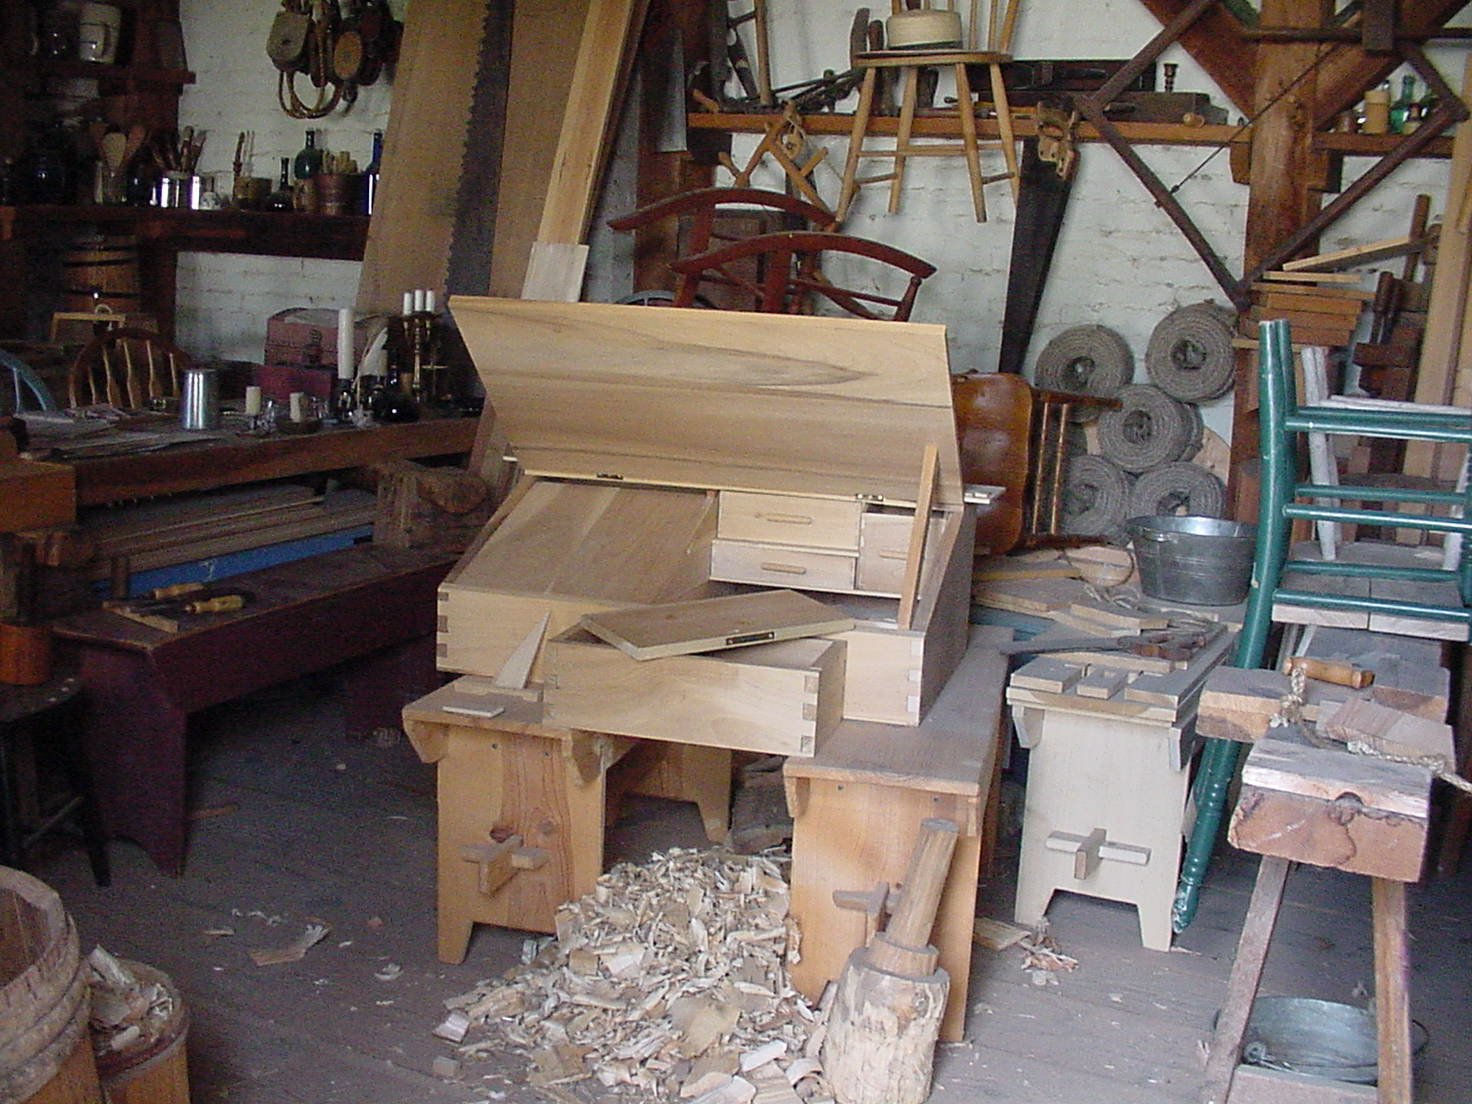 Woodworking shop...